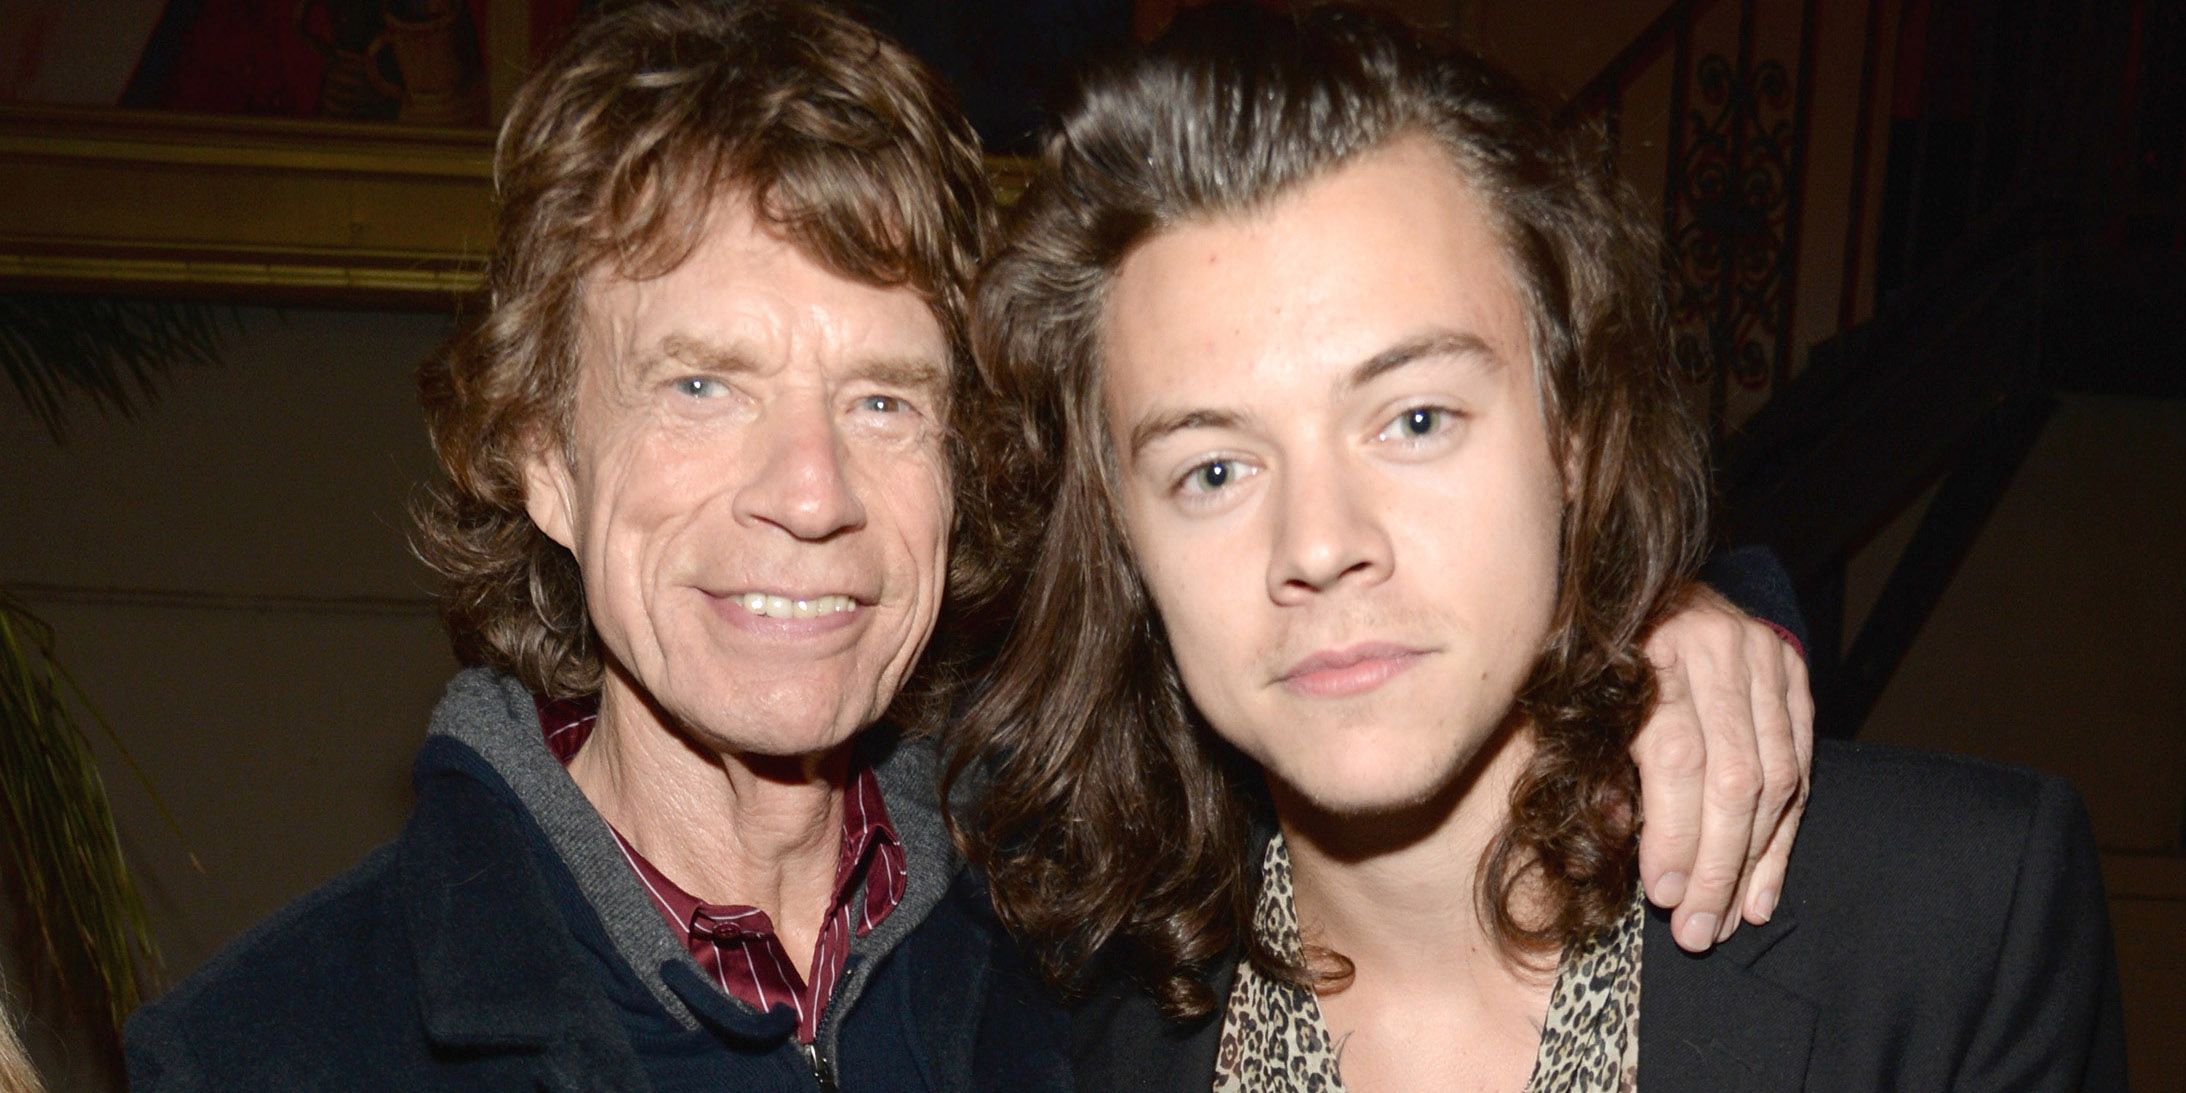 Harry Styles Short Hairstyle Mick Jagger Rolling Stone